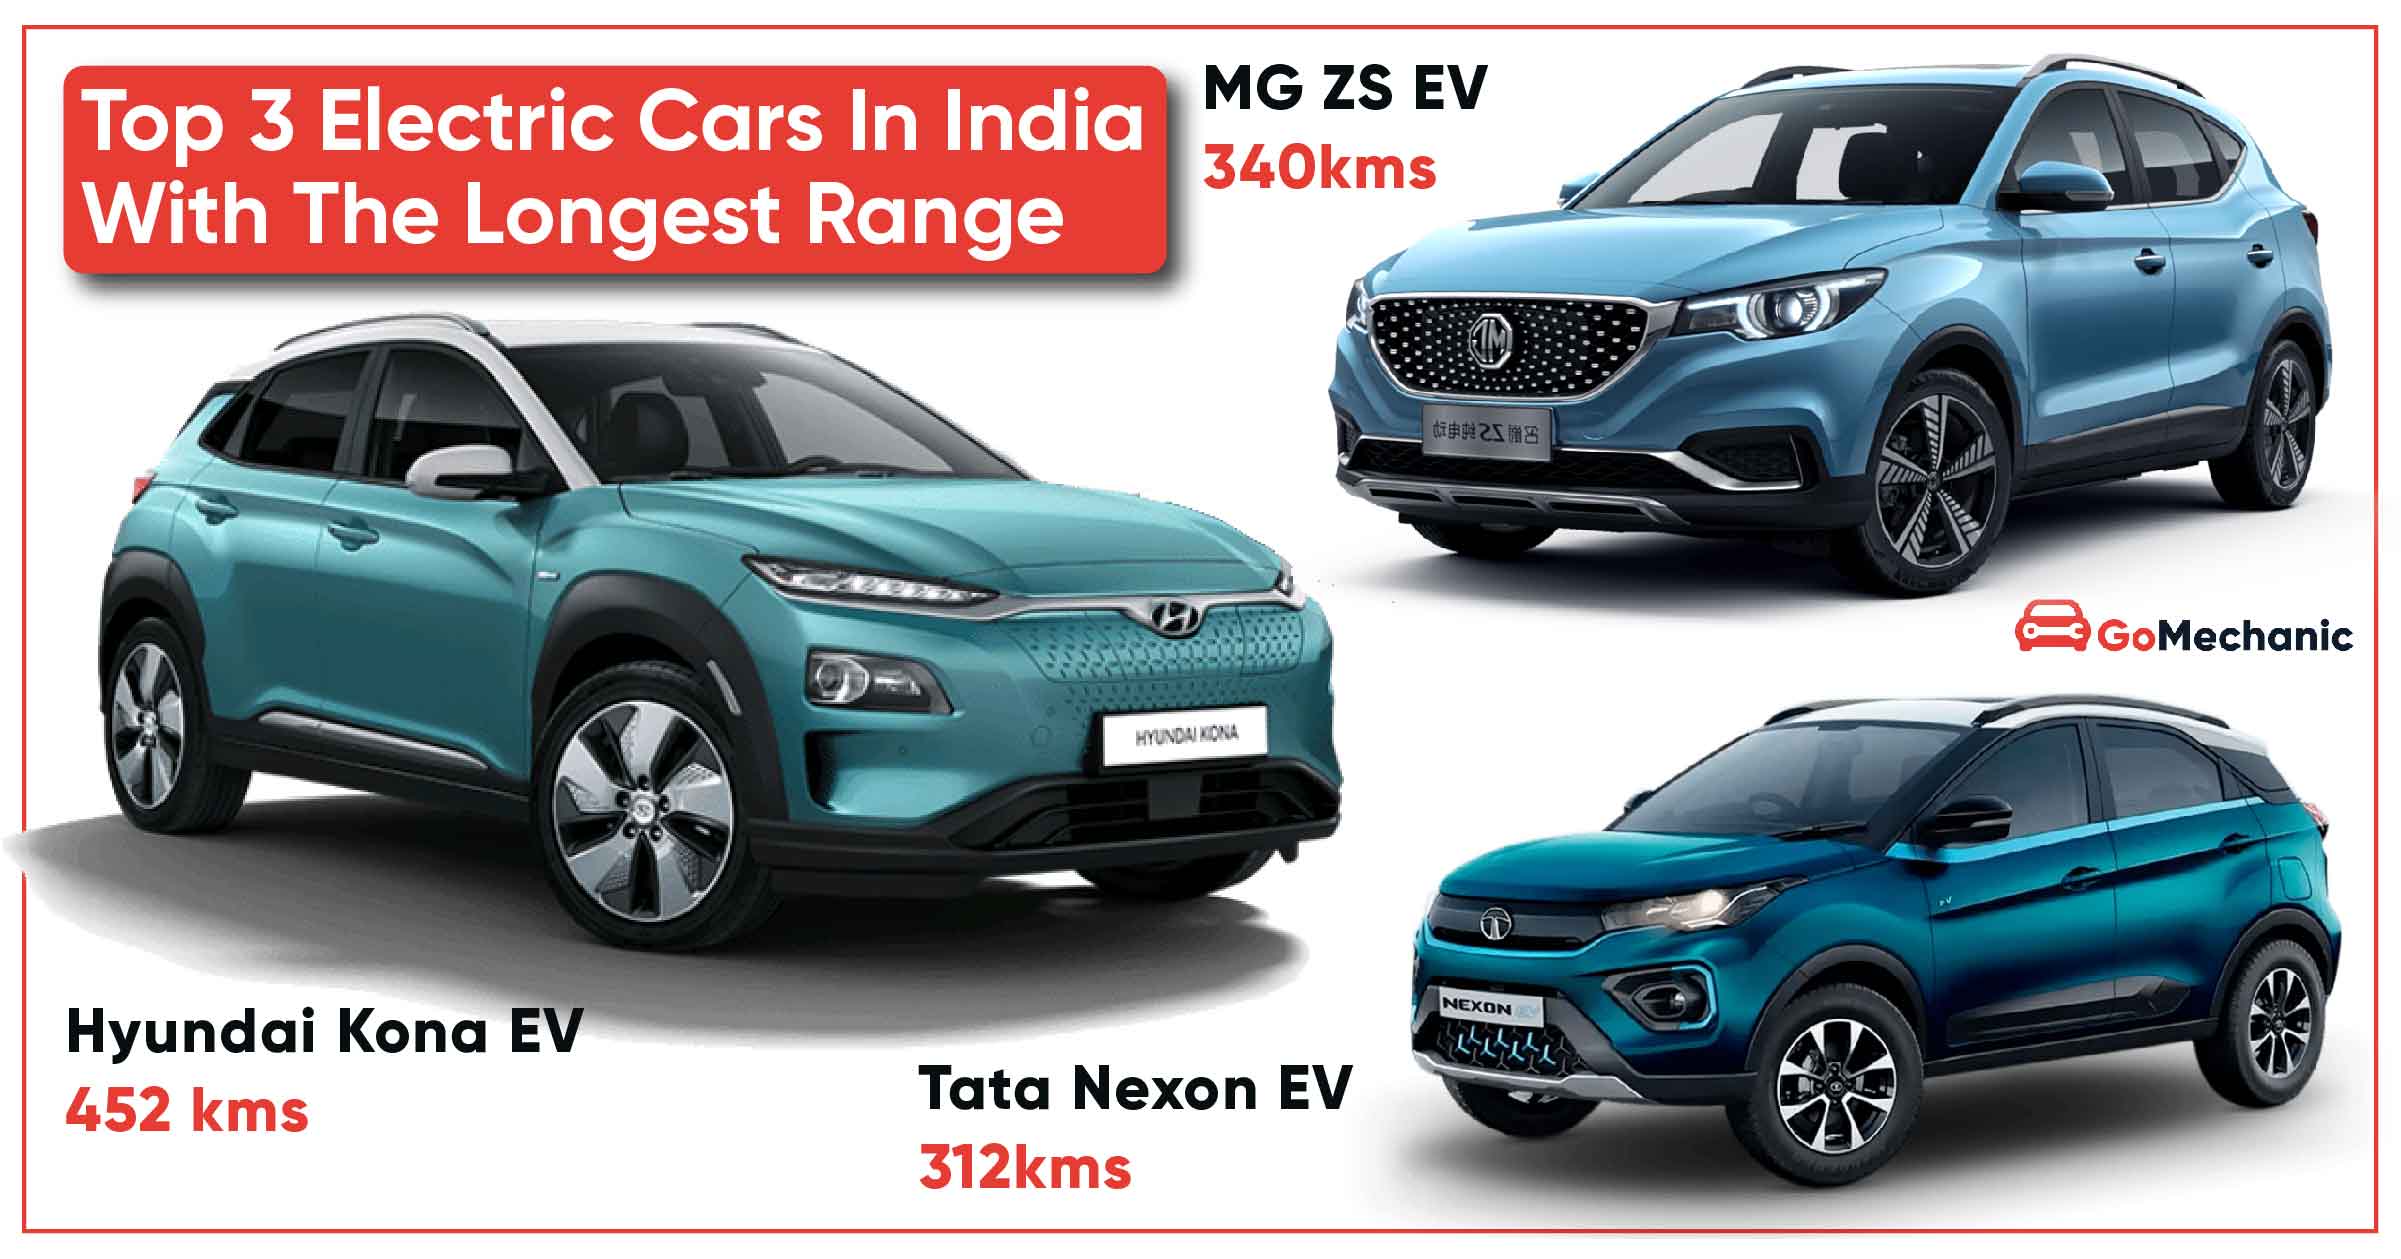 Top 3 electric cars in India with the longest range